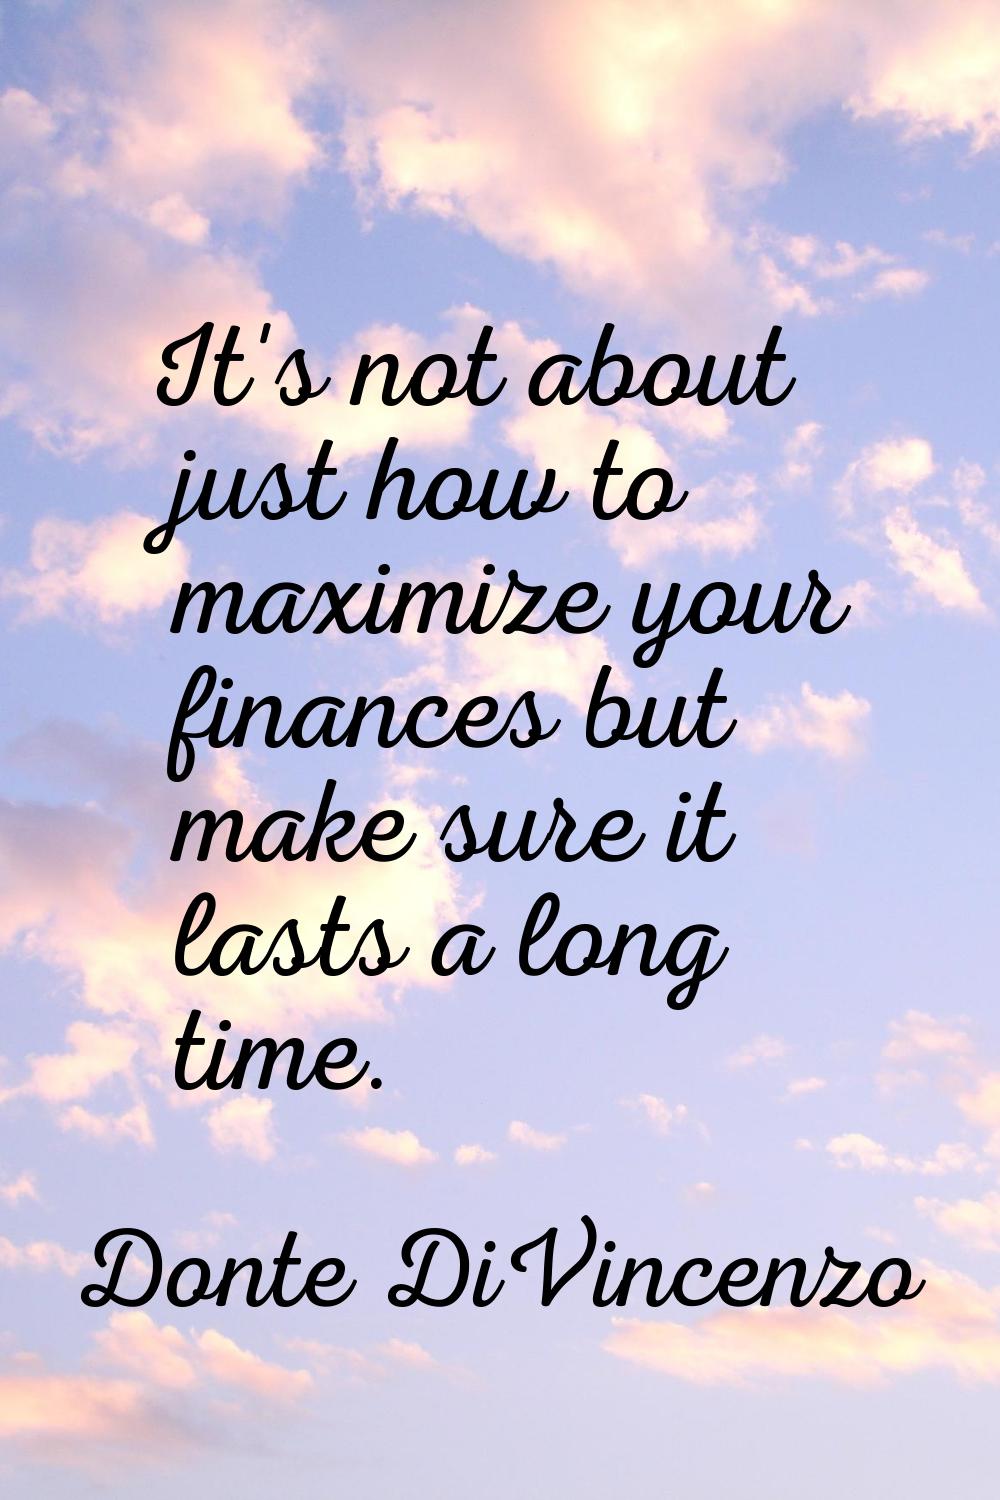 It's not about just how to maximize your finances but make sure it lasts a long time.